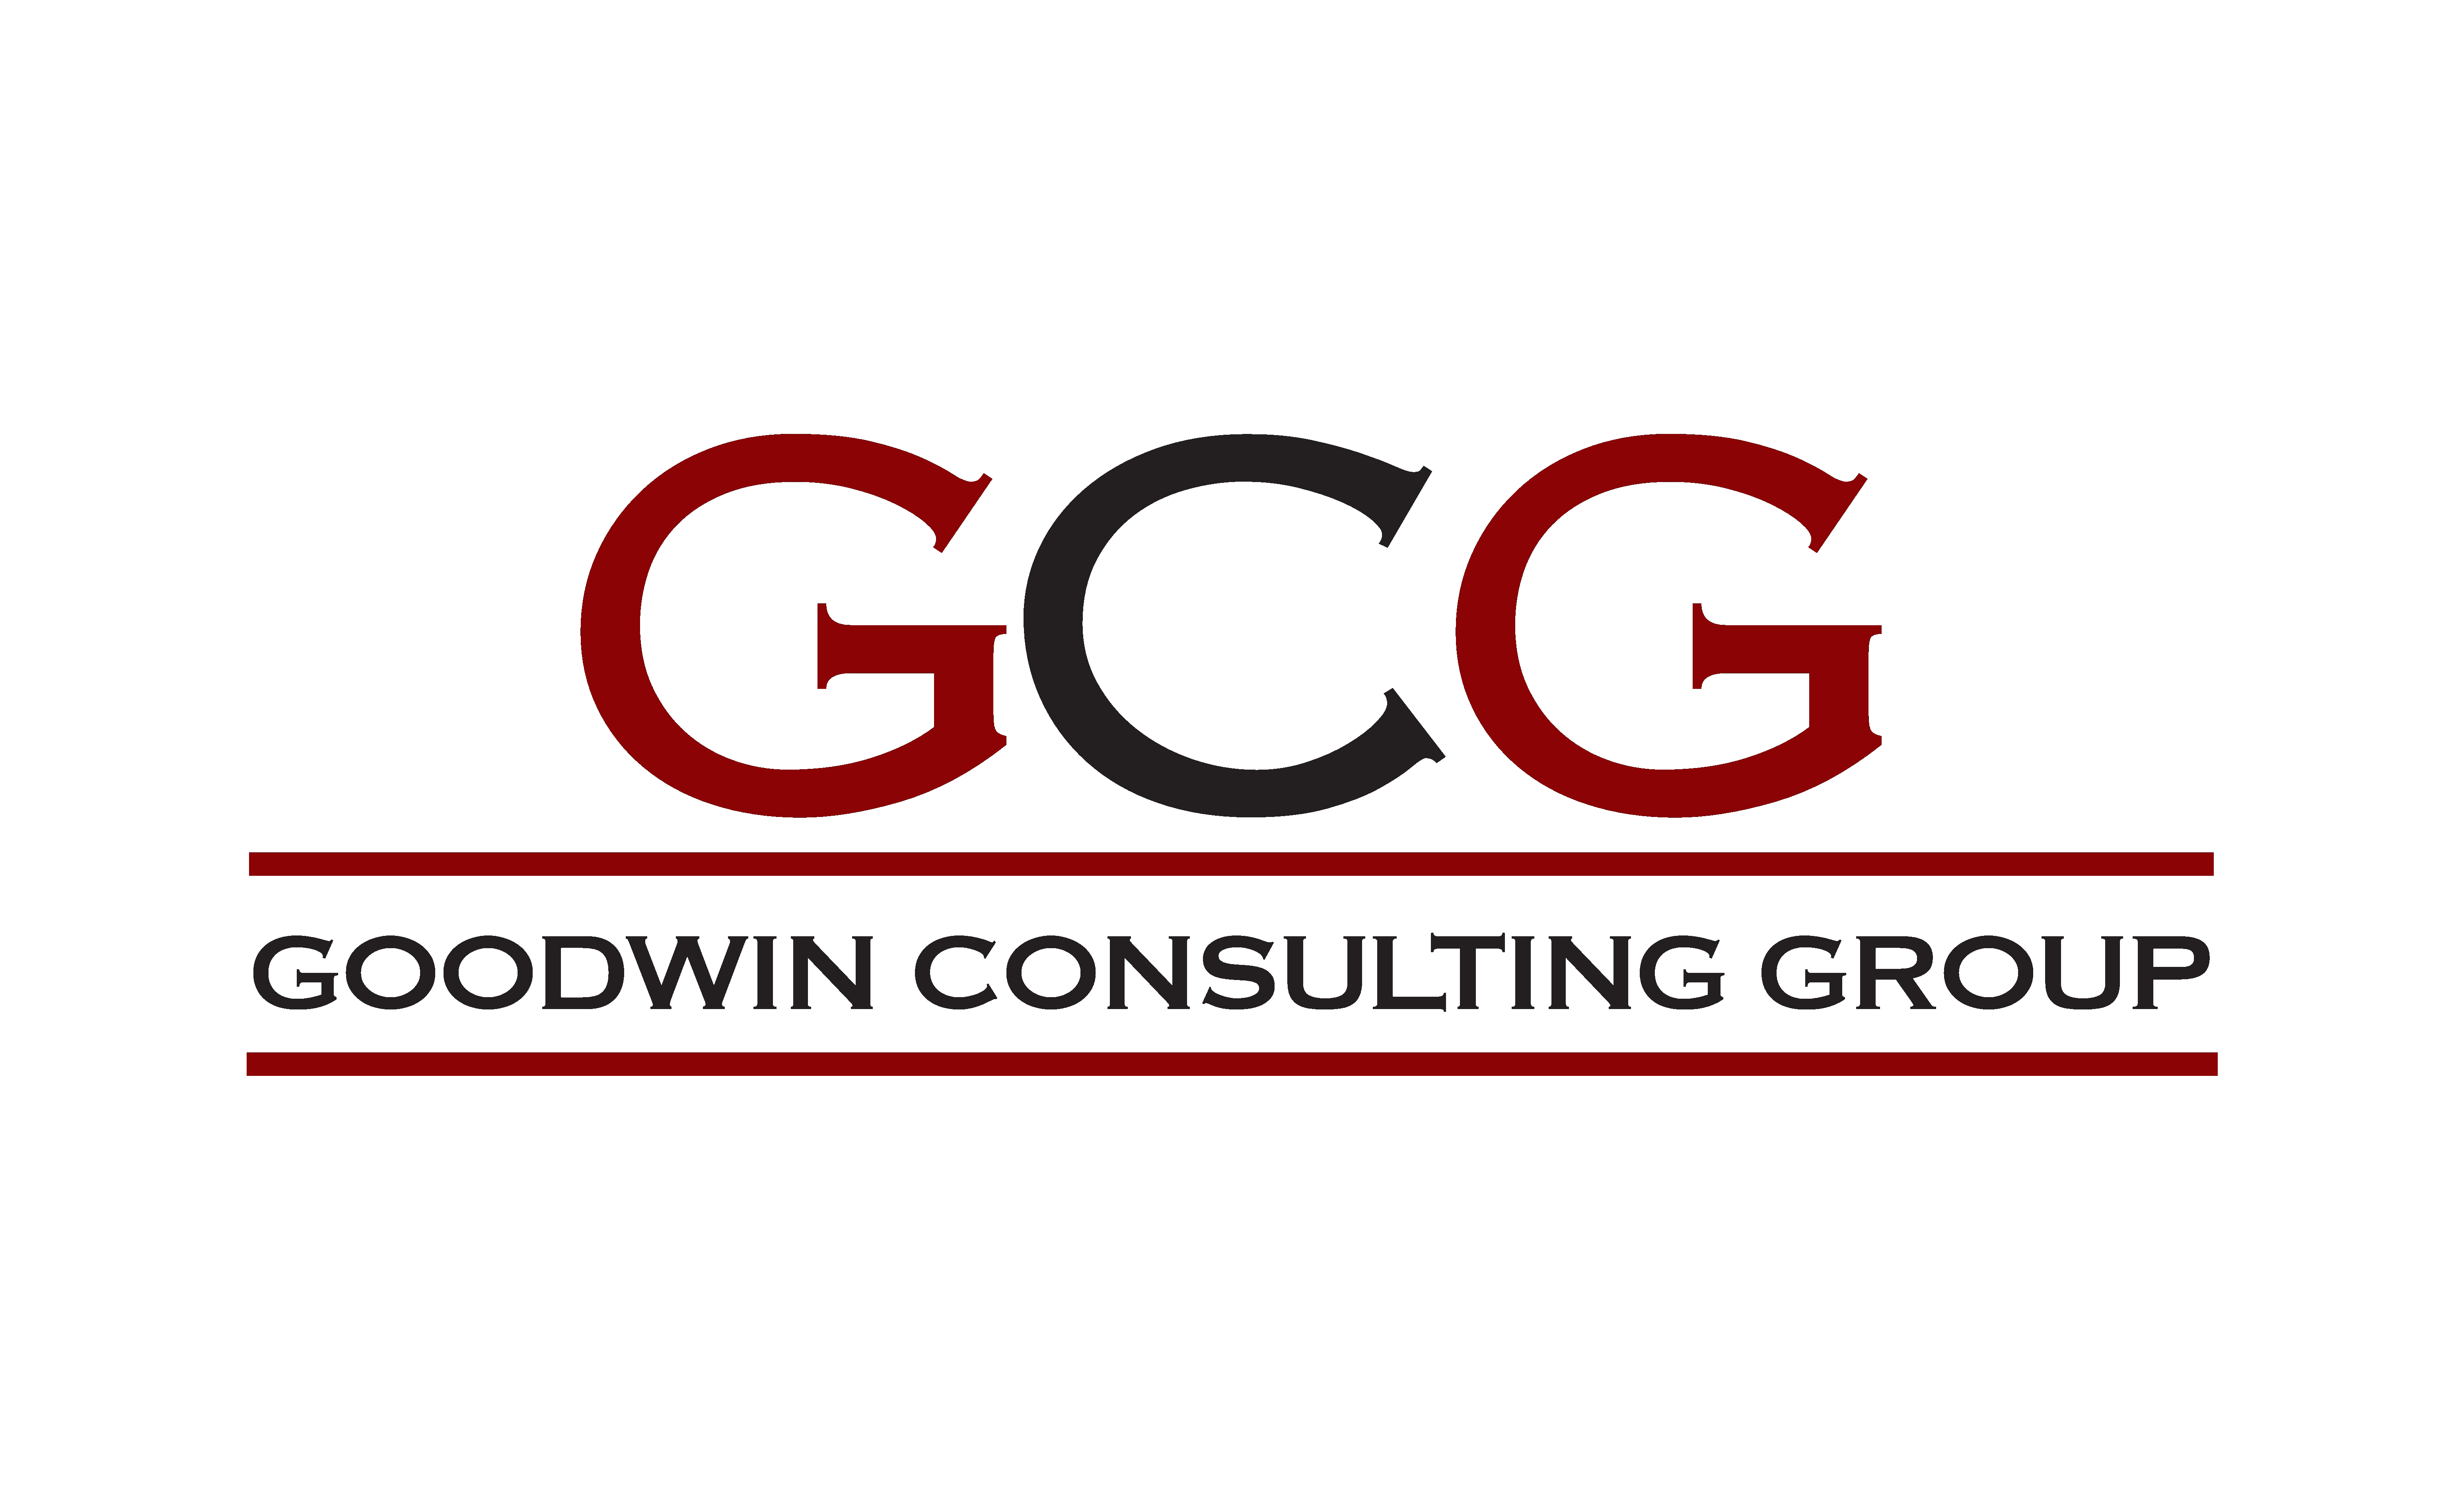 Goodwin Consulting Group